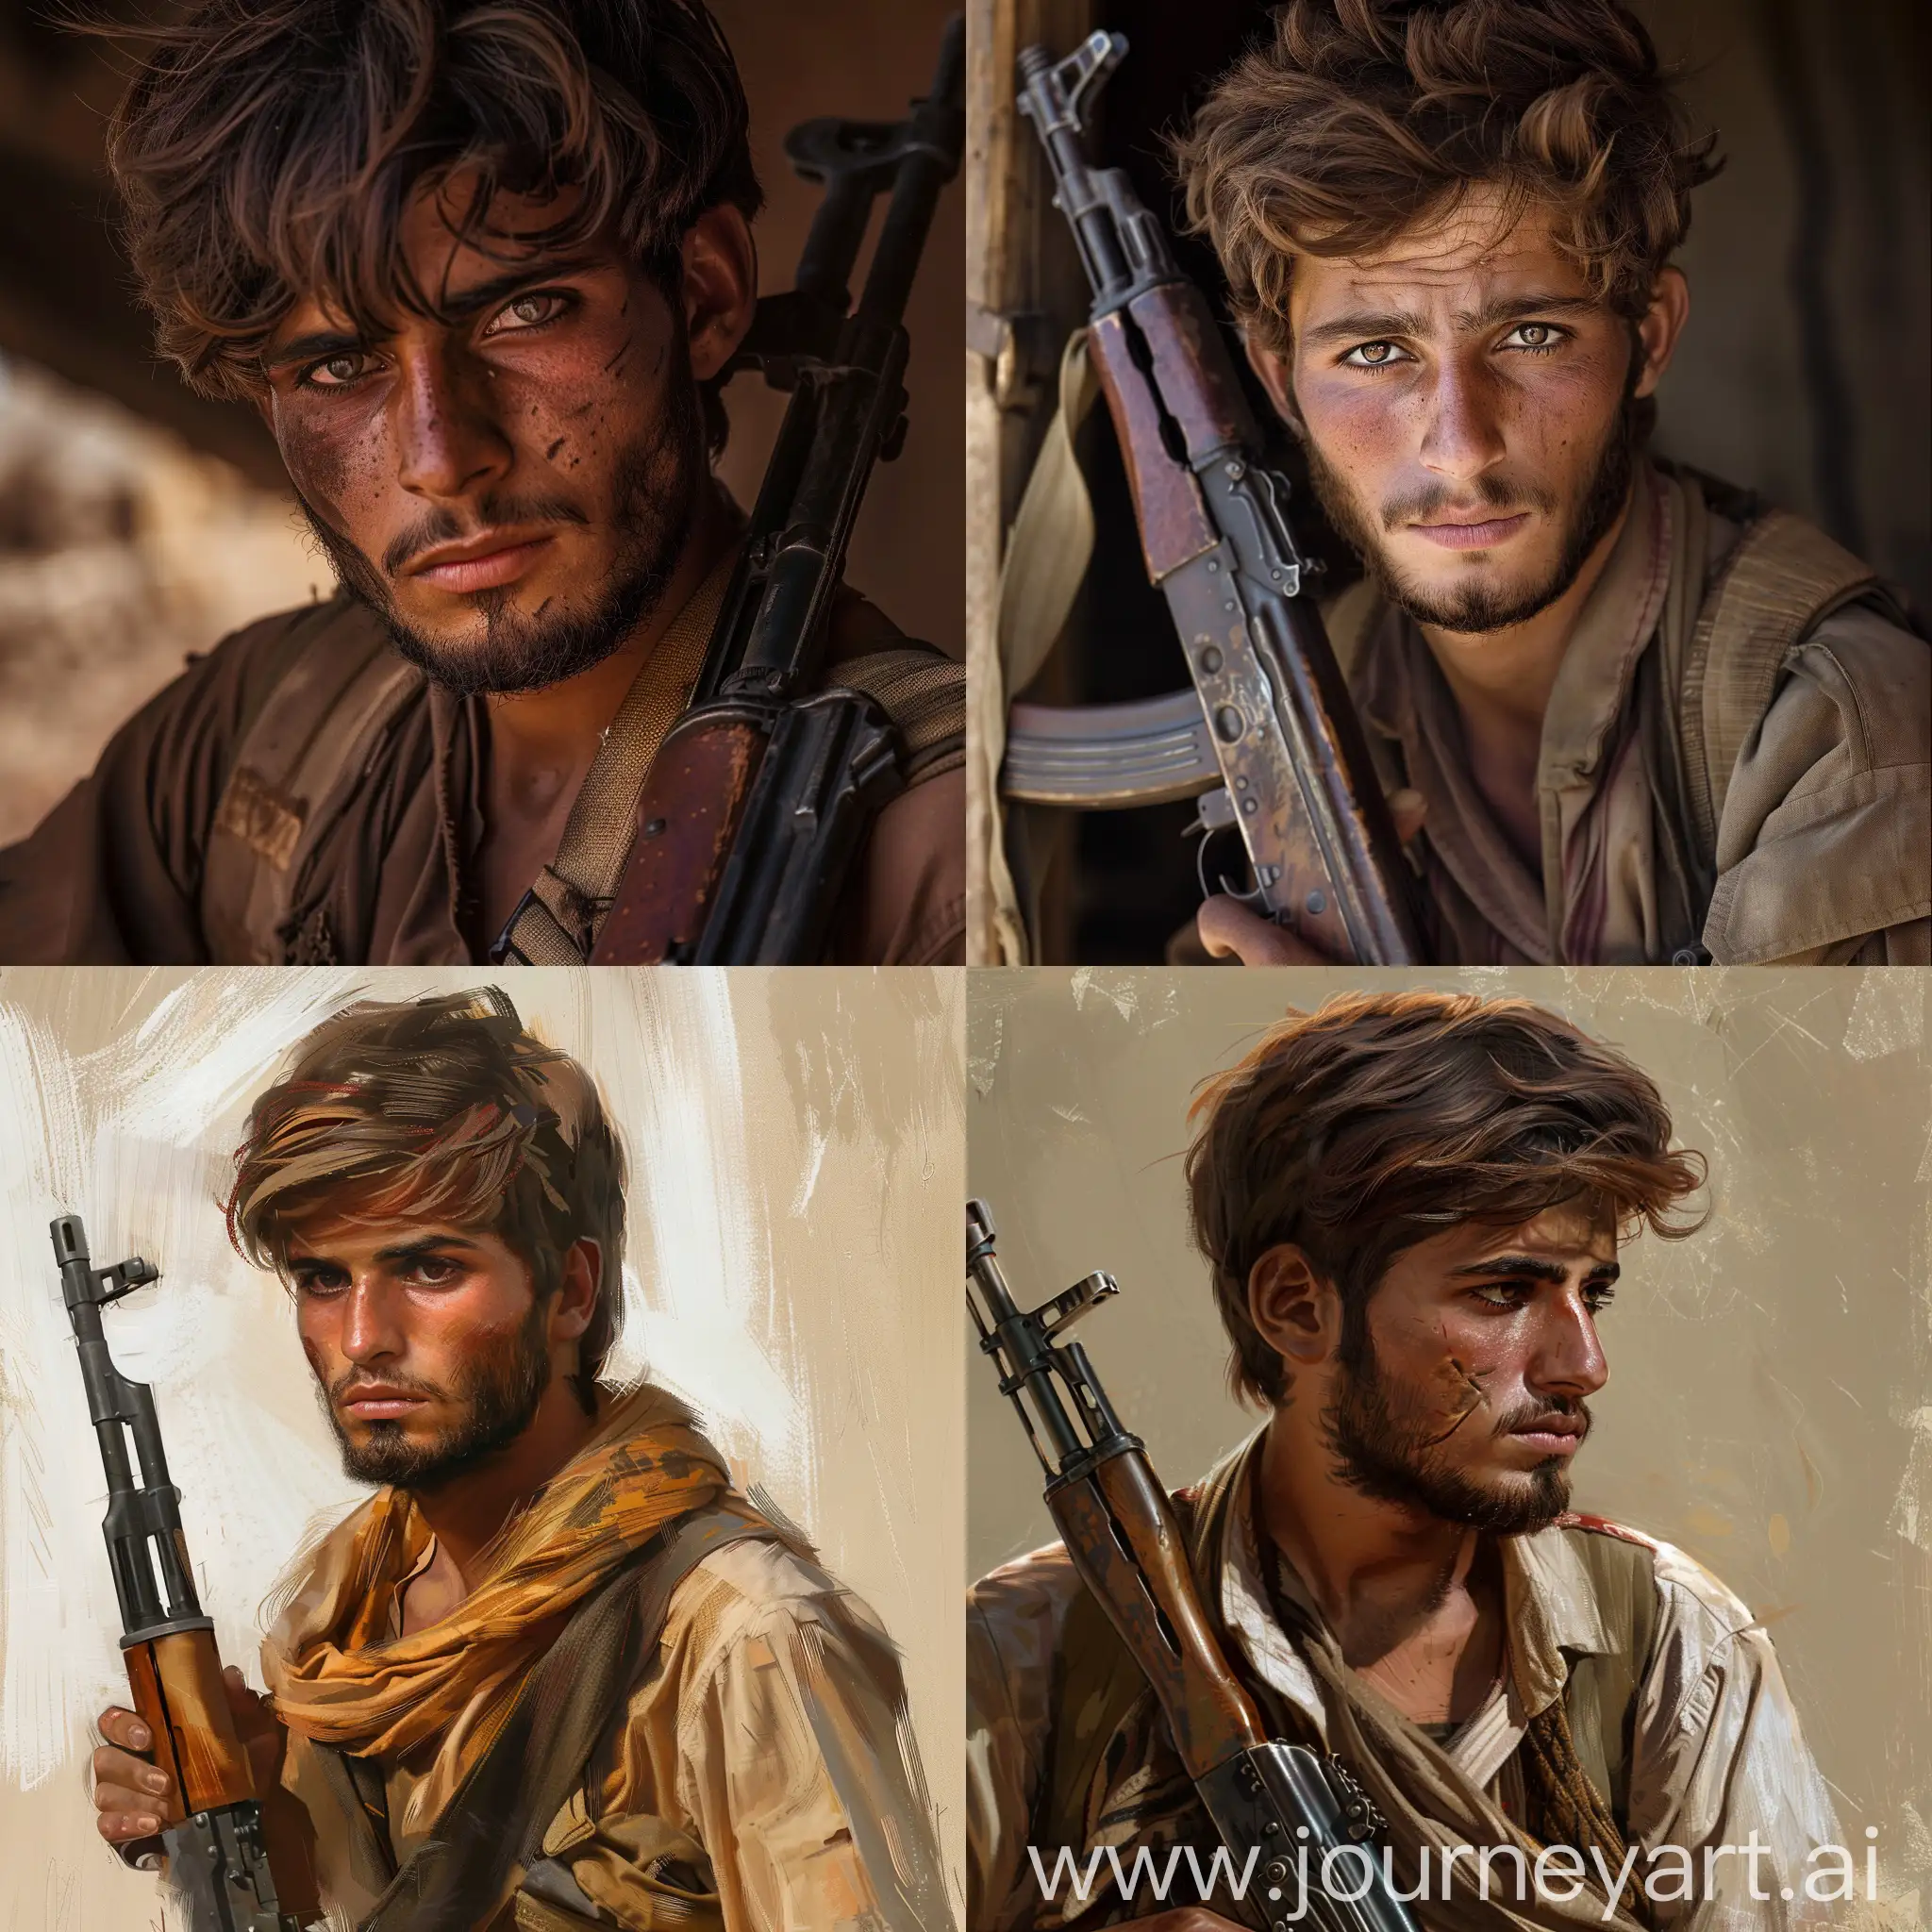 A handsome young Yemeni man with a light brown beard, carrying an AK-47 rifle, his features conveying a sense of mystery, sadness, and strength.